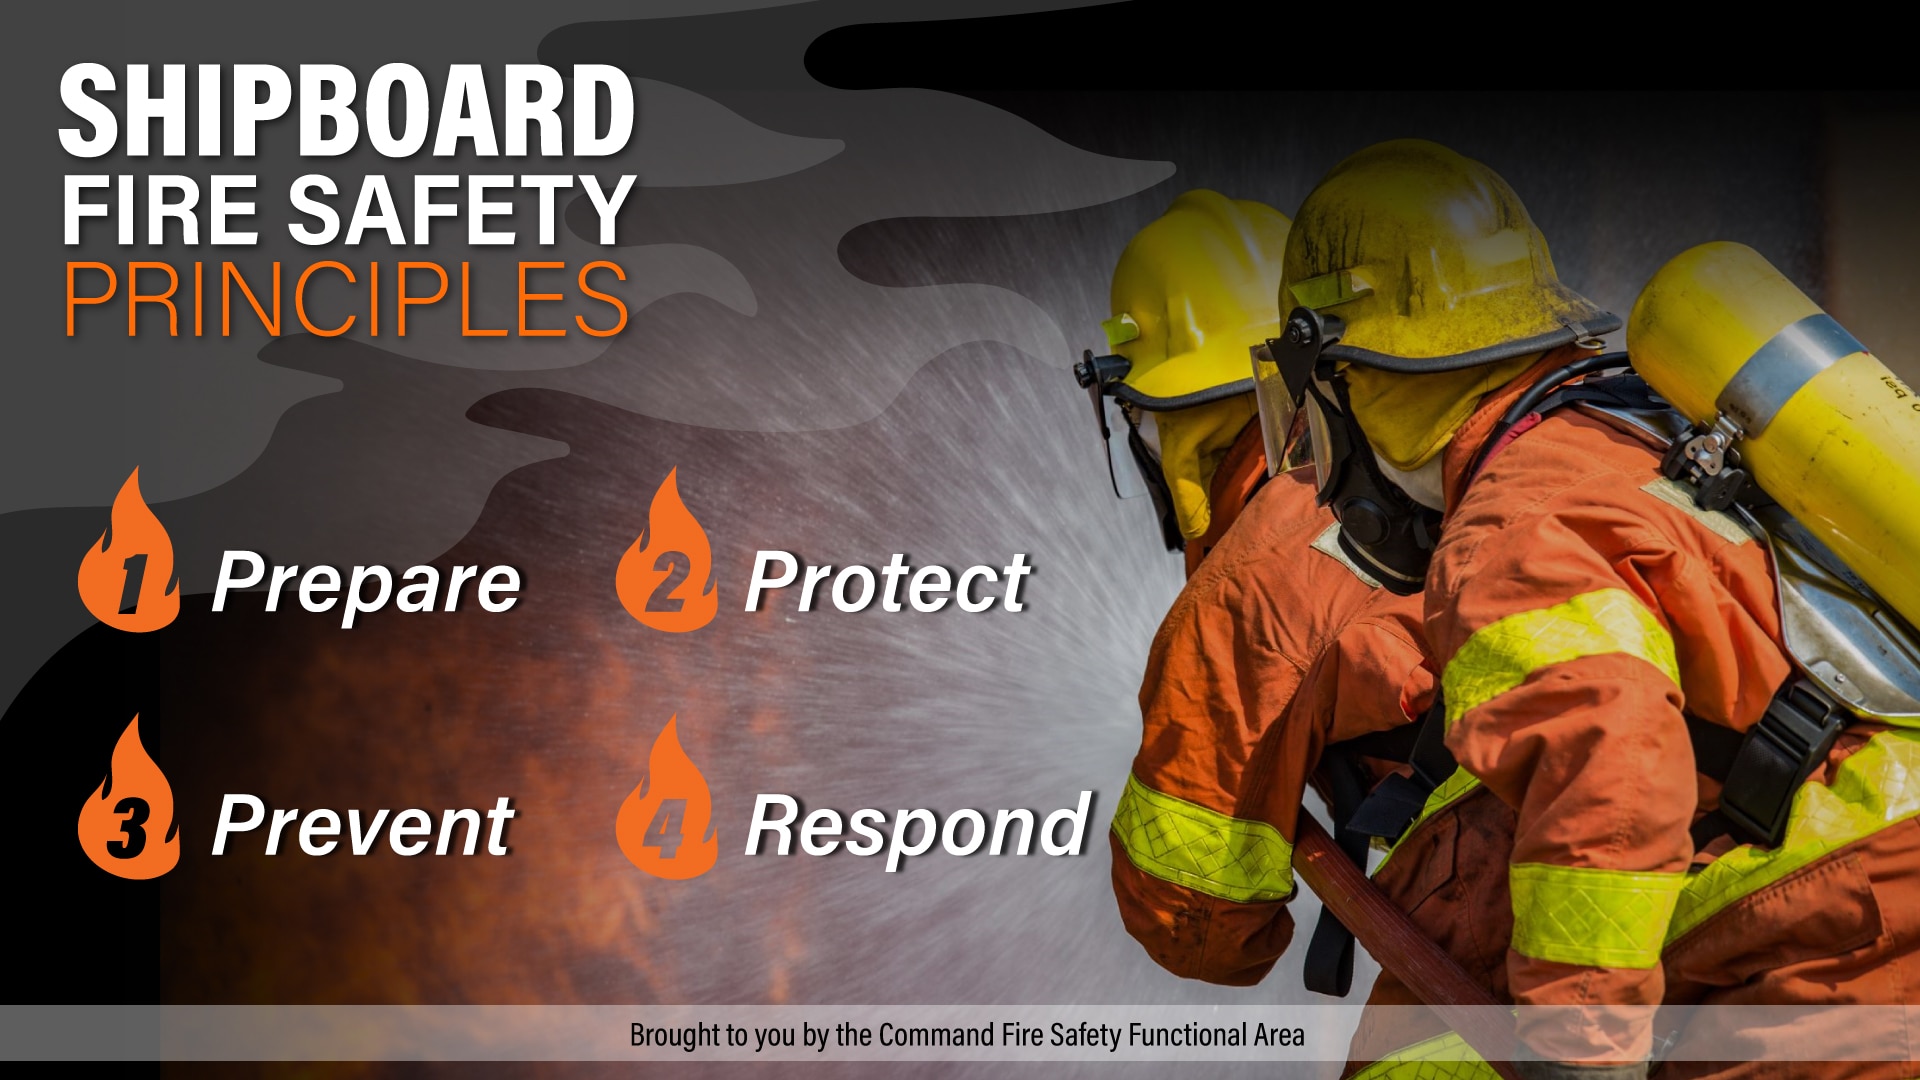 Infographic detailing shipboard fire safety principles, including: Prepare, Protect, Prevent and Respond. (U.S. Navy graphic by Robin Lee)